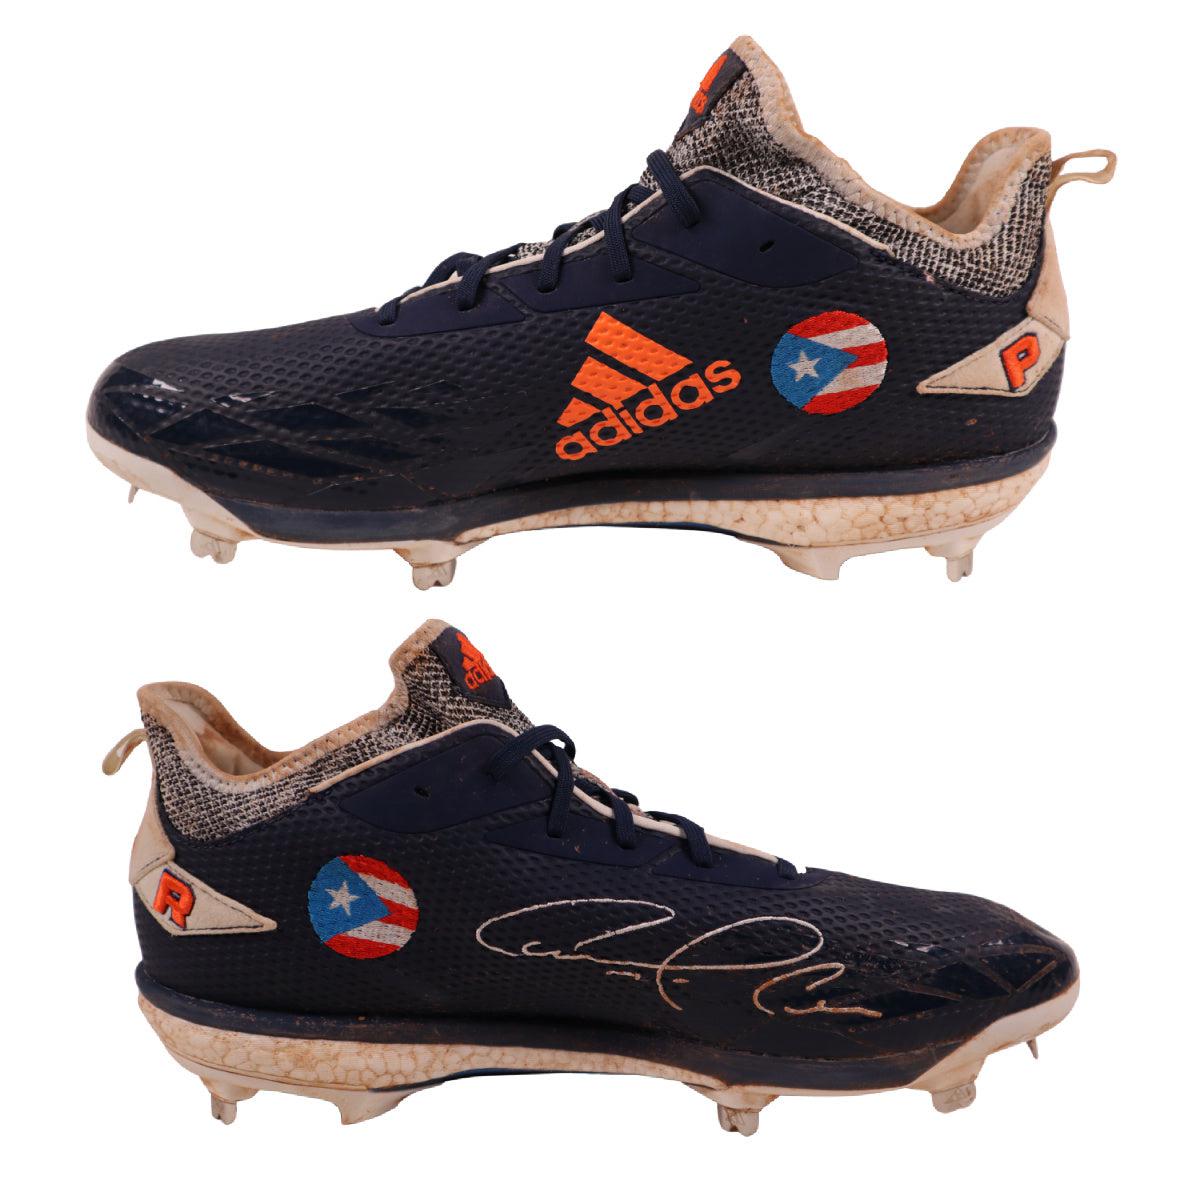 CARLOS CORREA AUTOGRAPHED GAME USED HOUSTON ASTROS CLEATS SIGNED JSA 4